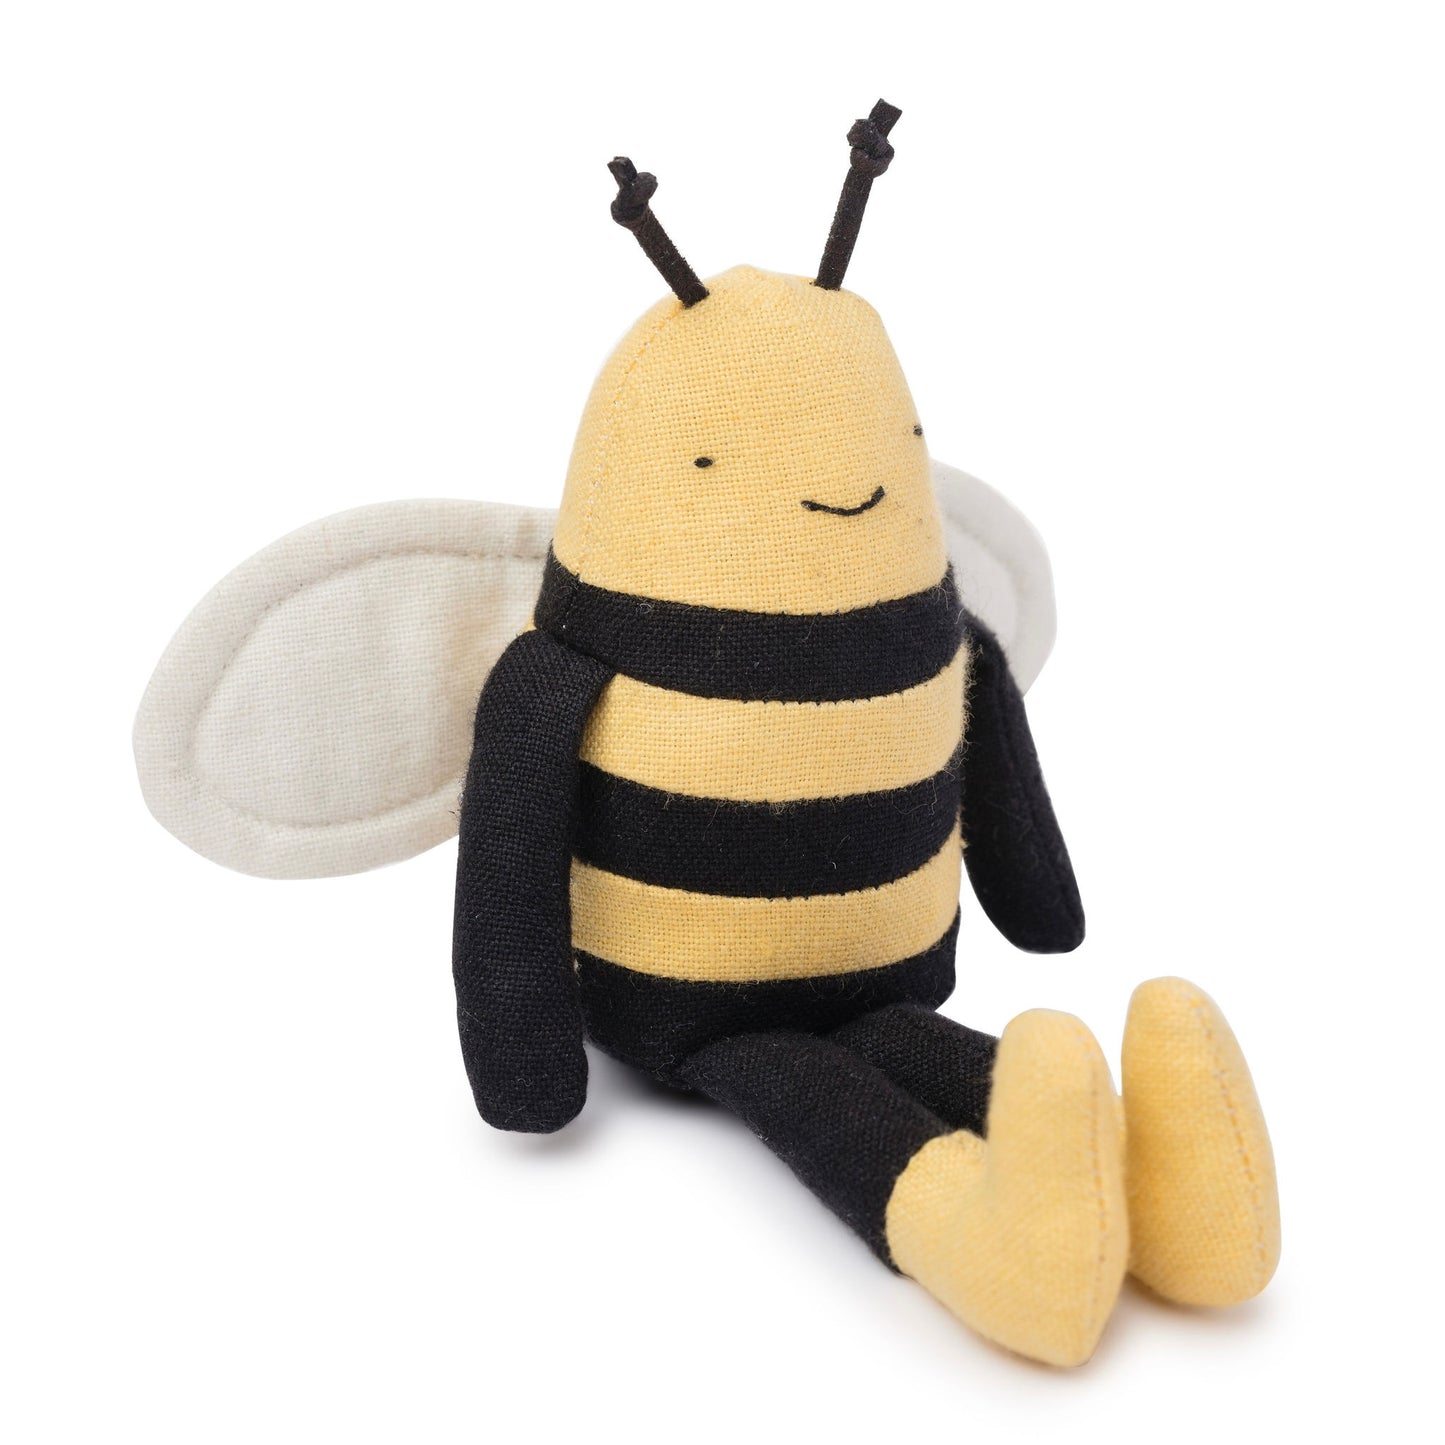 Mr Pickles - The Bumble Bees